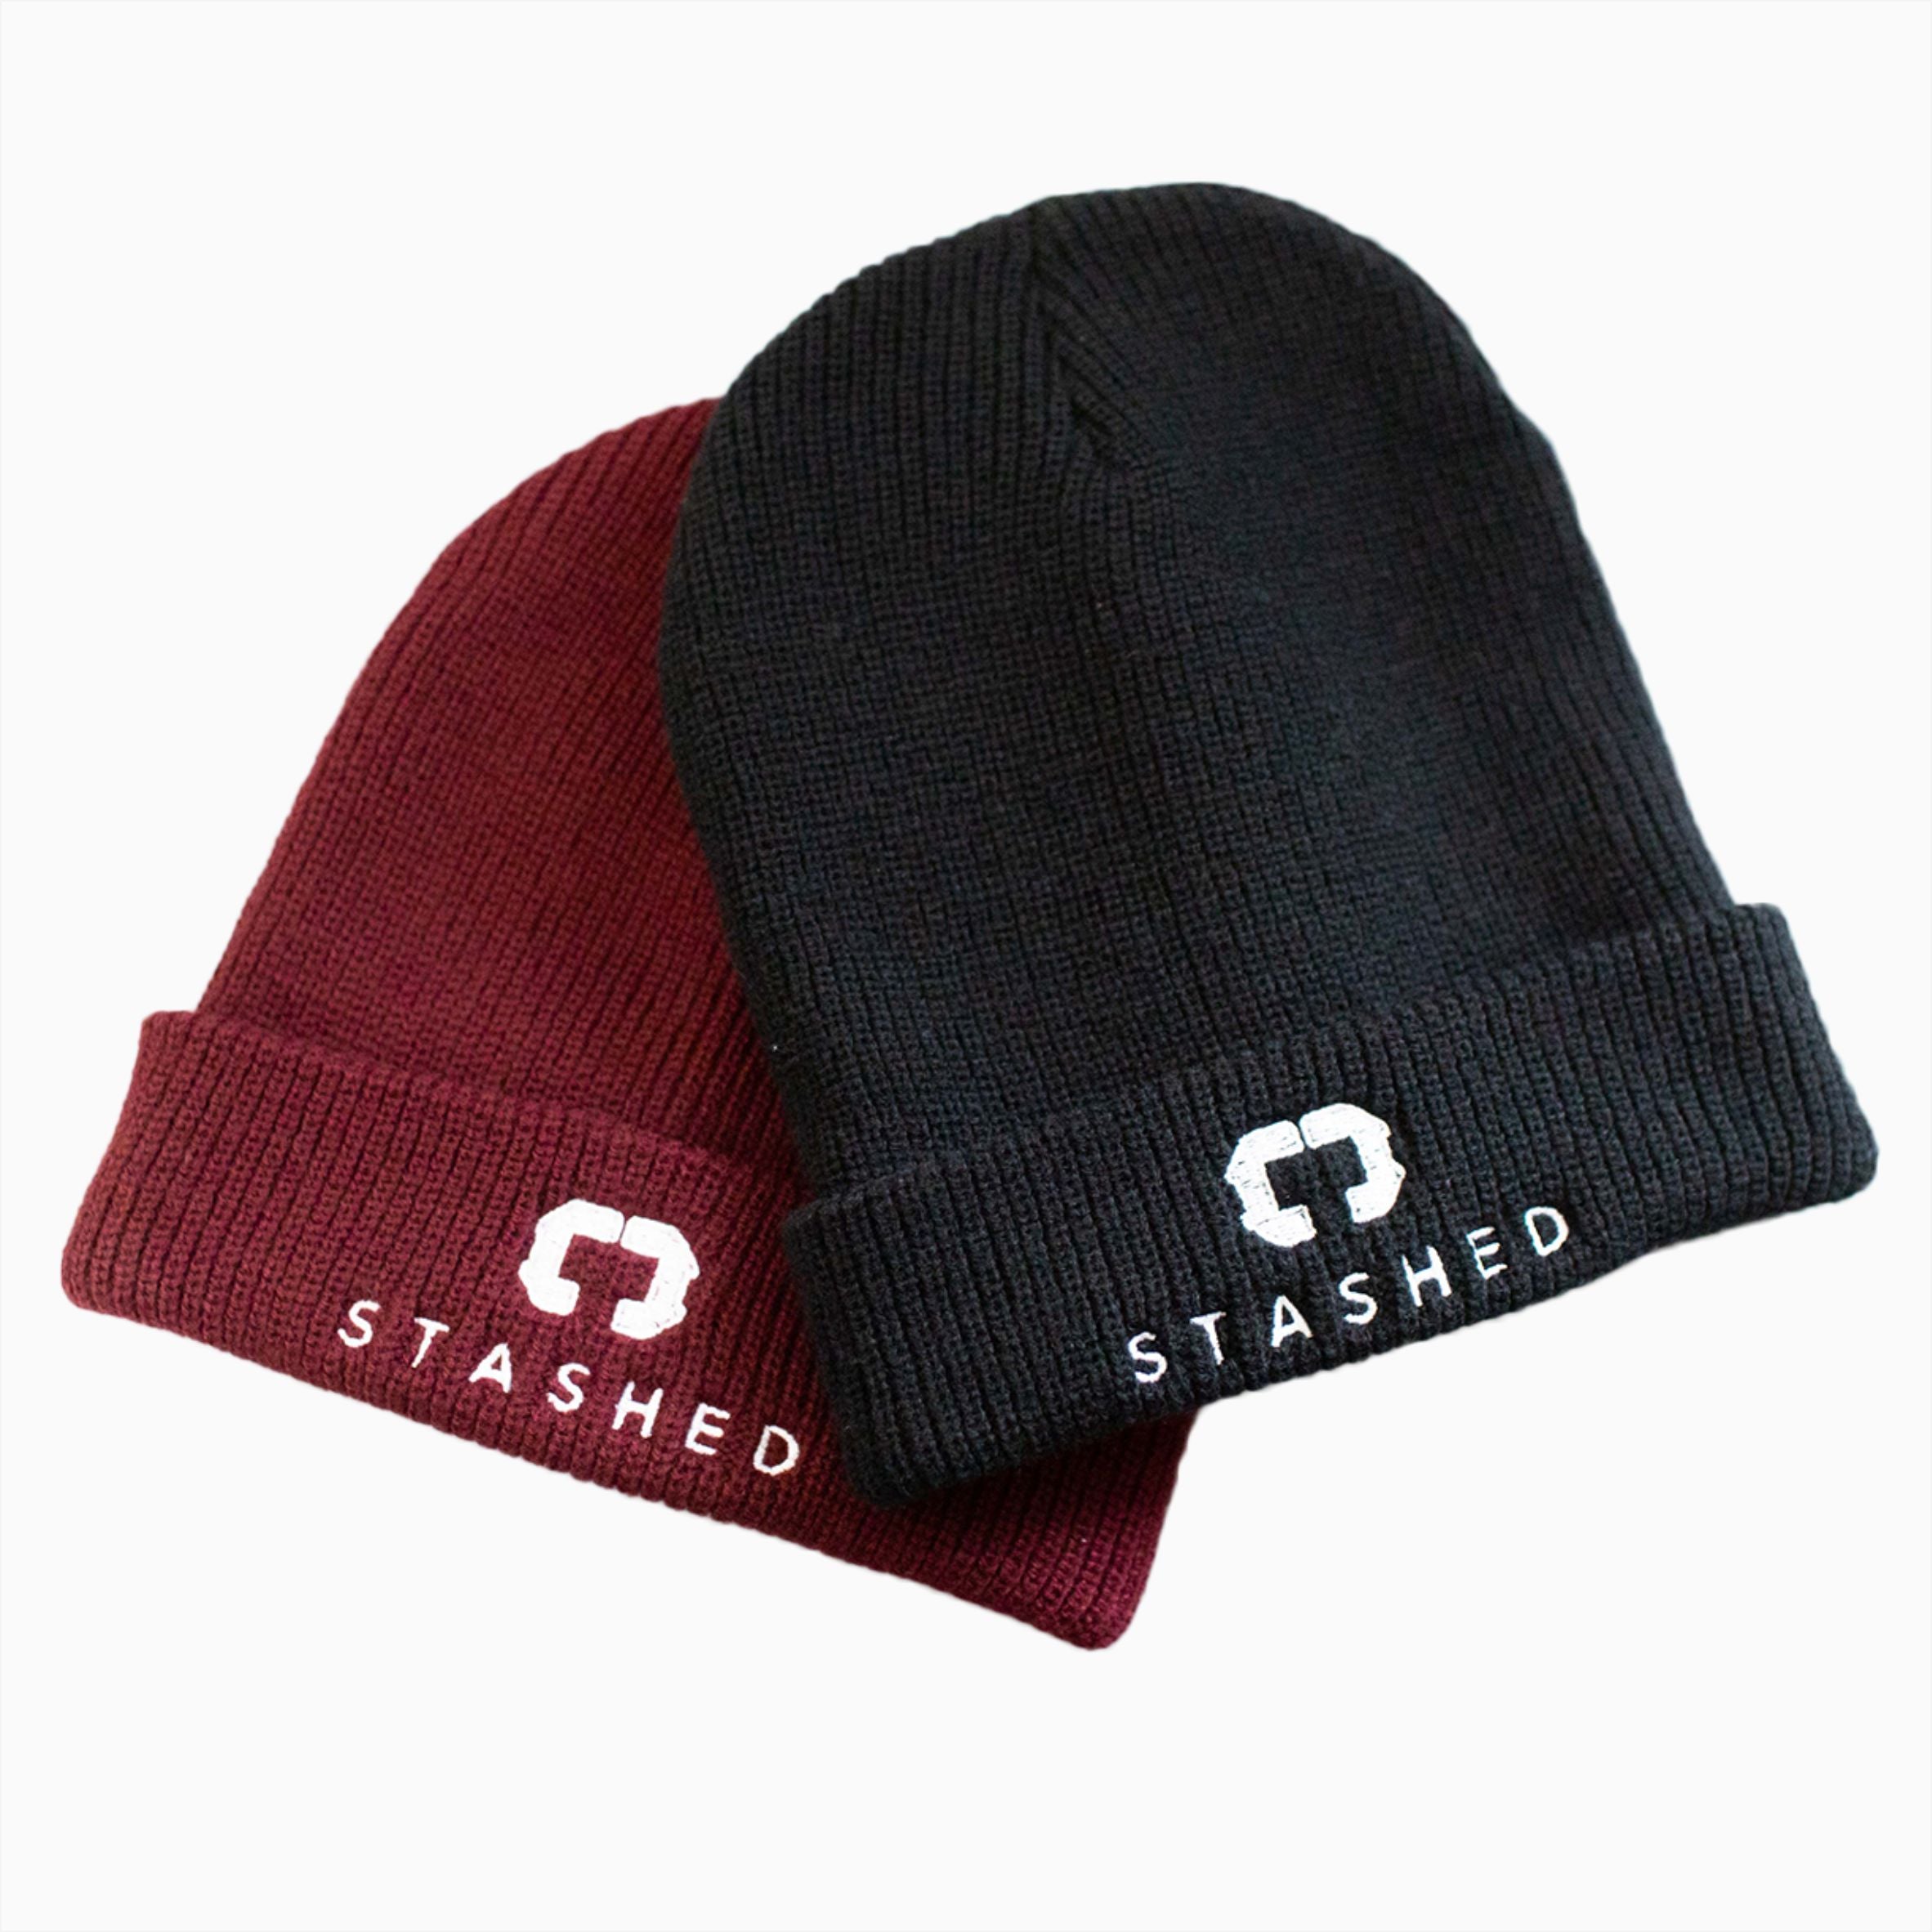 Stashed Products Beanie Hat - Burgundy - Black